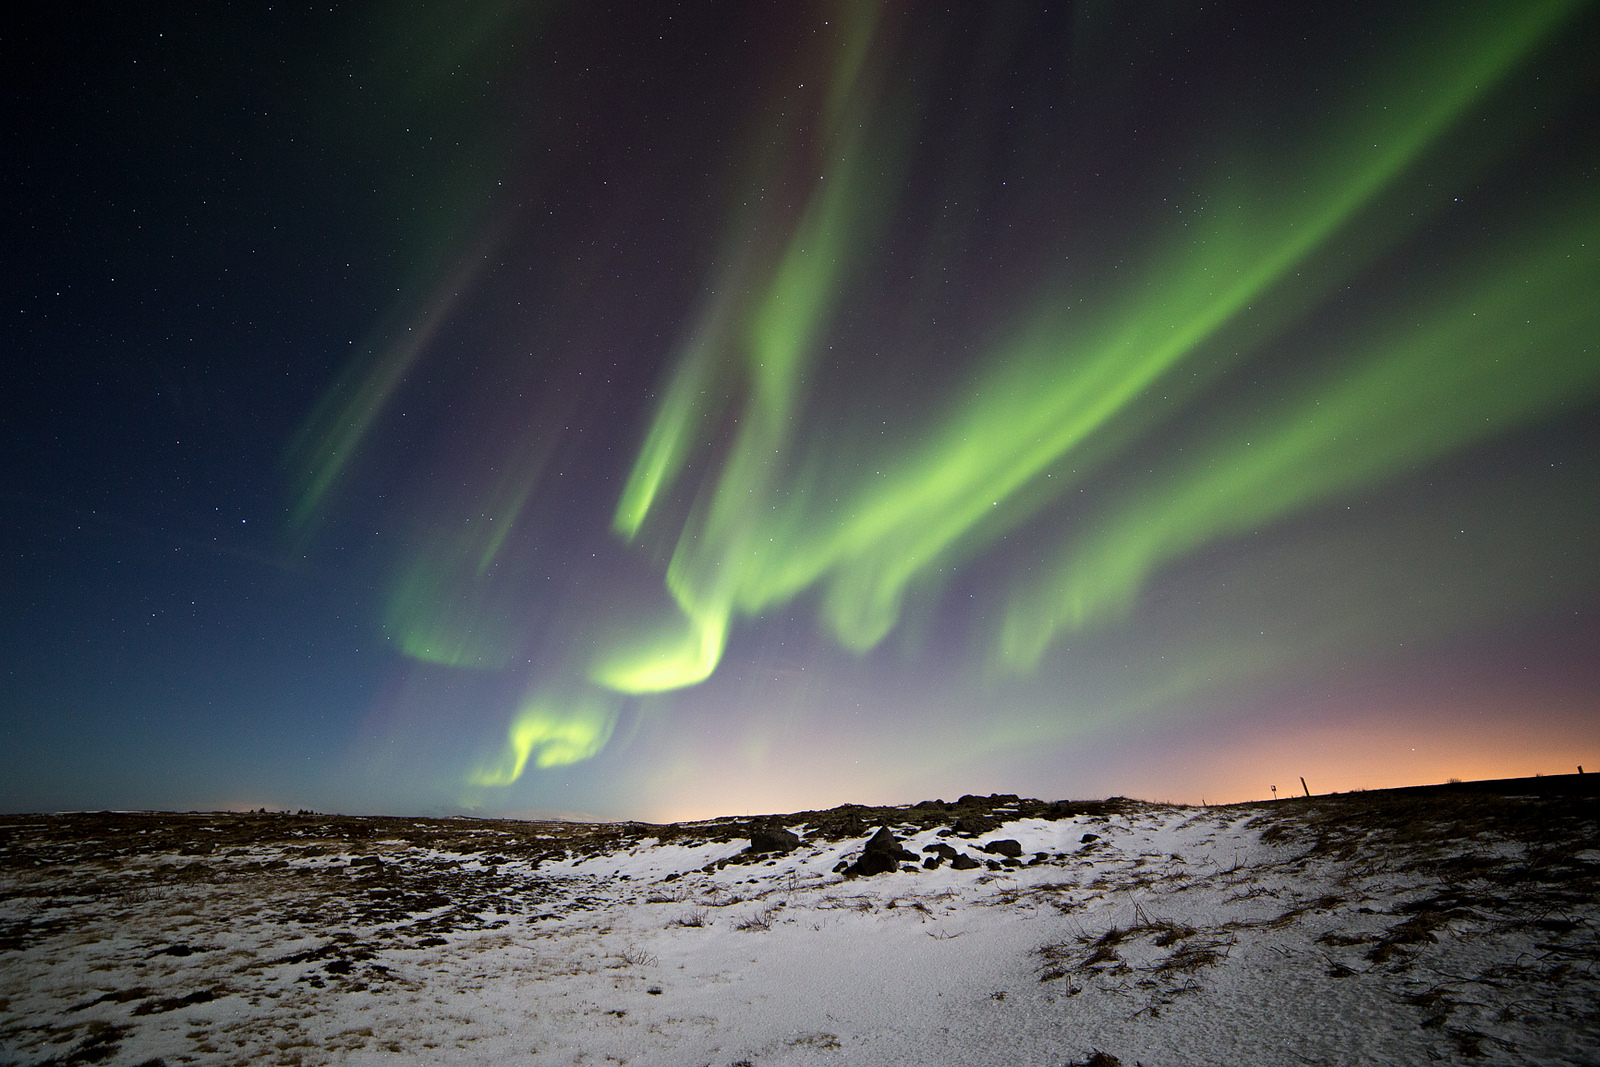 The Northern Lights are pictured here over Iceland. Photo credit: David Phan. CC BY 2.0.